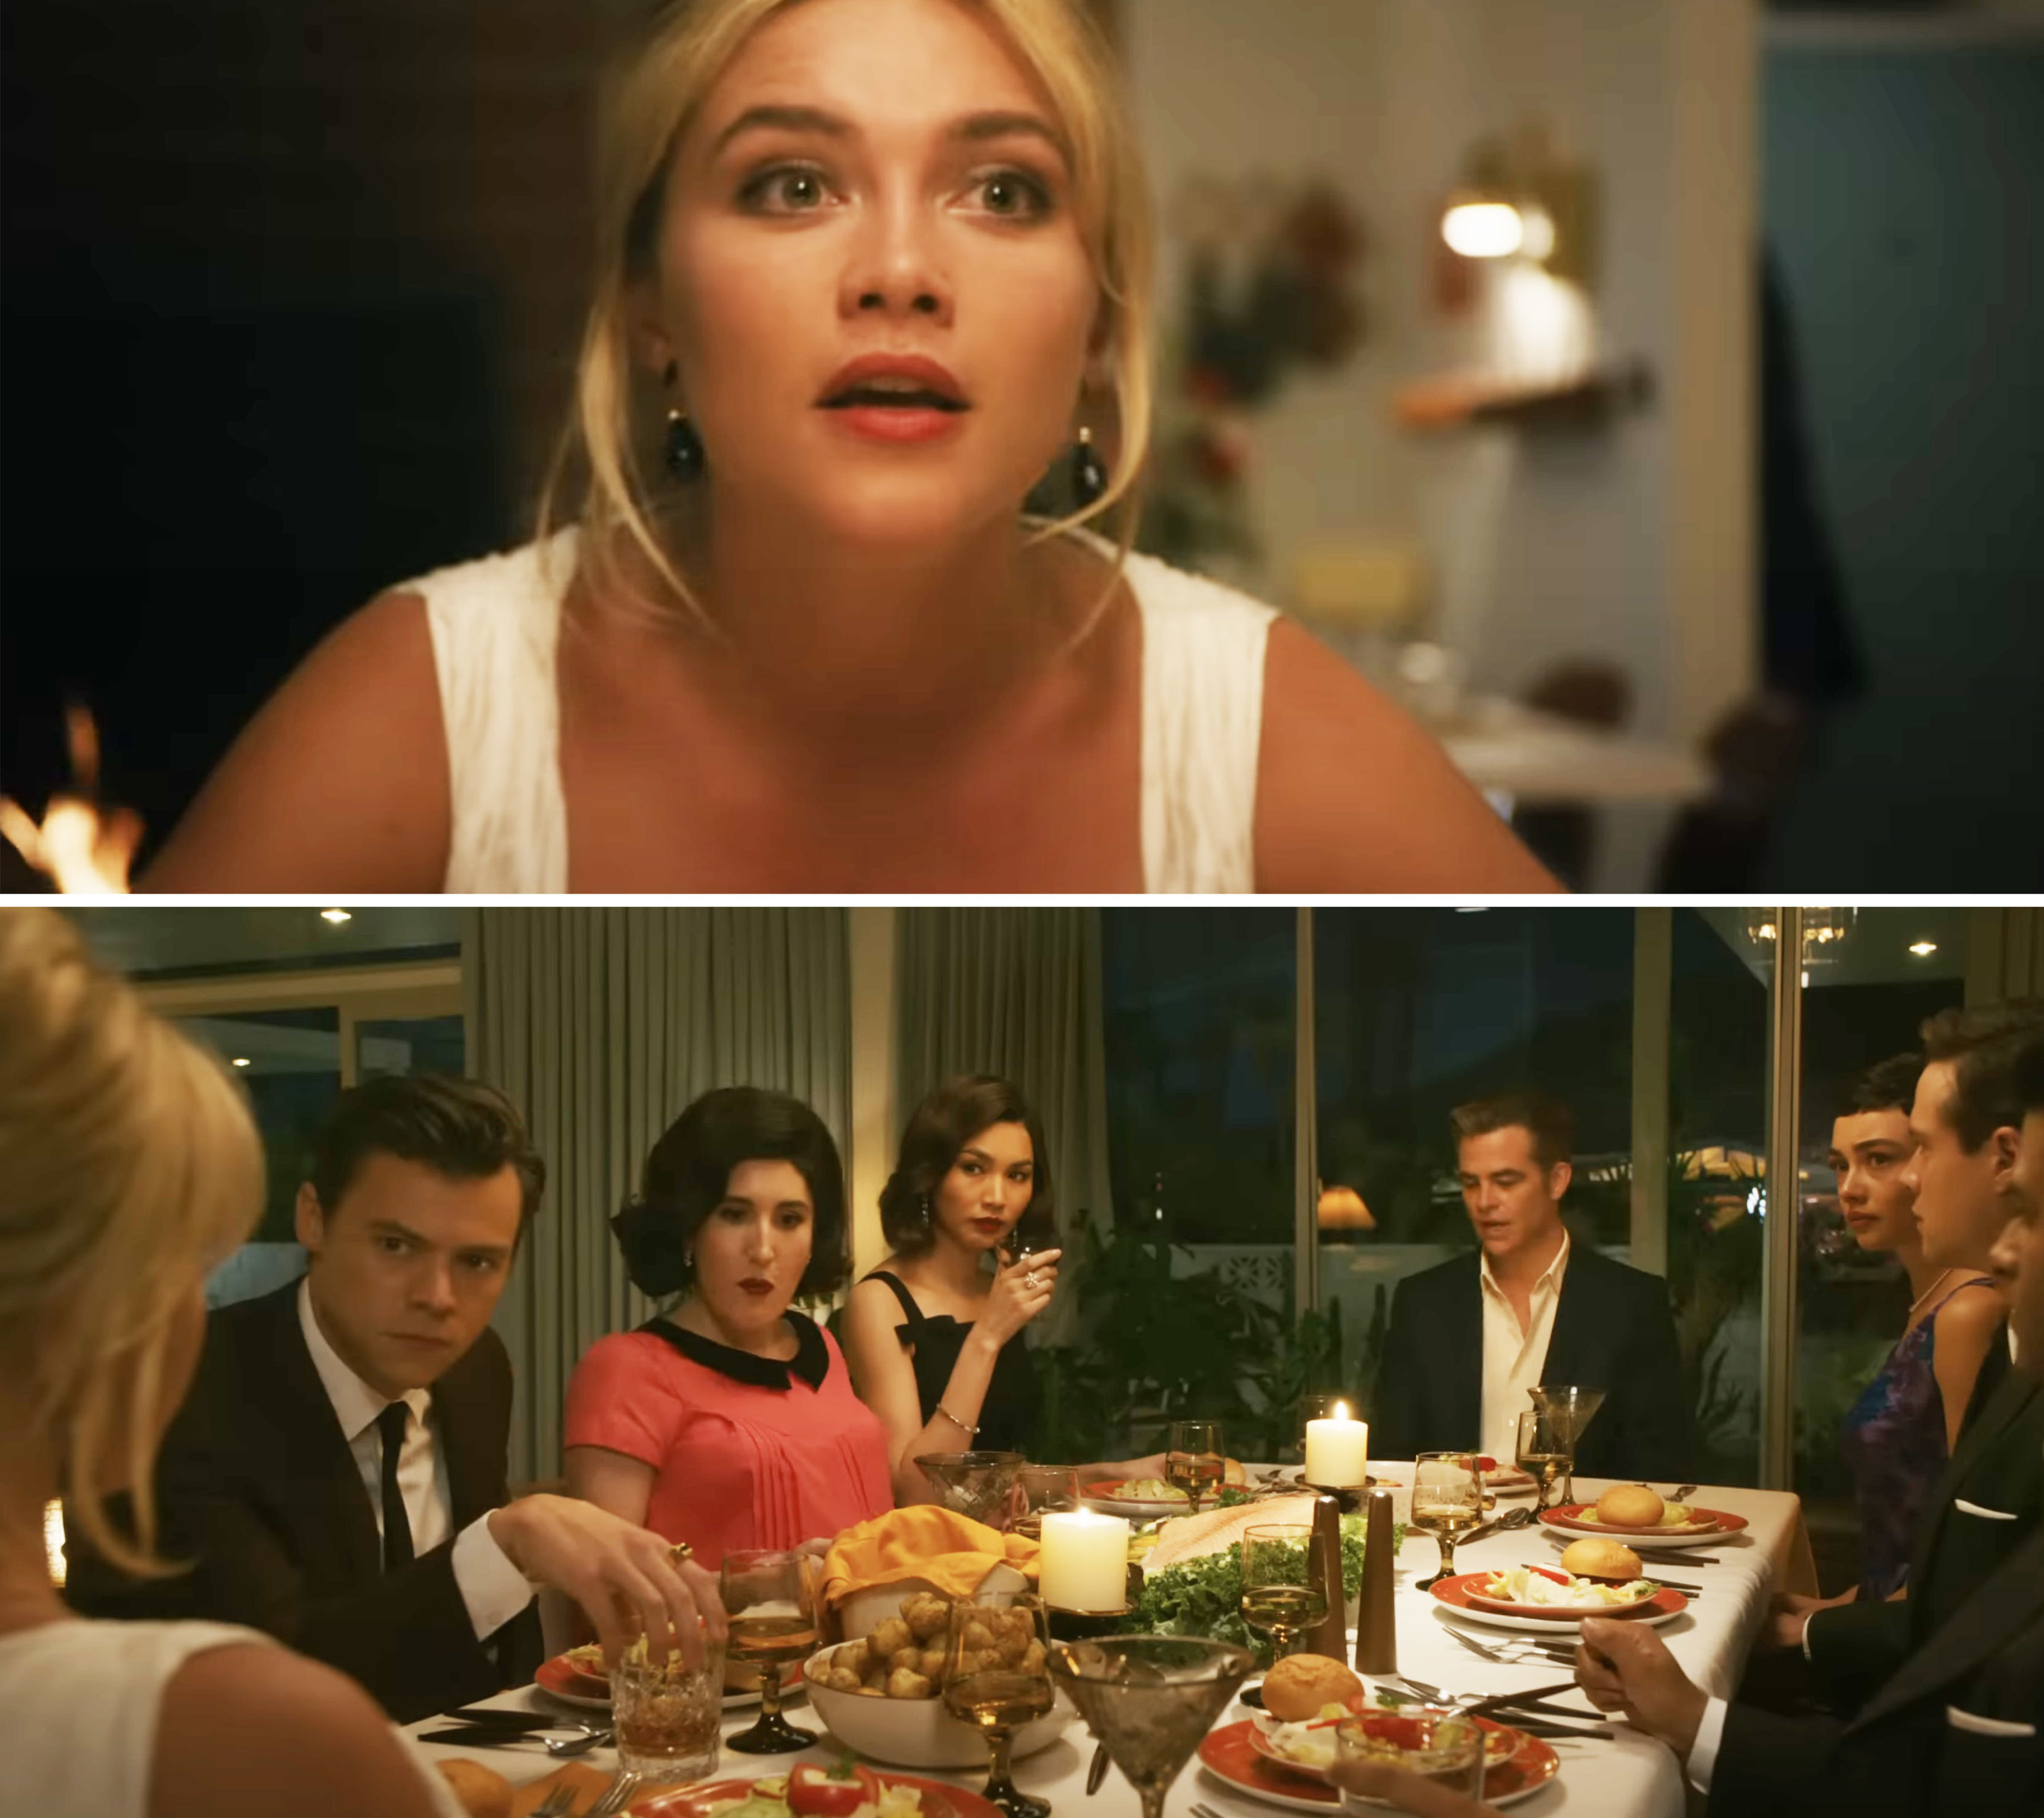 Florence Pugh, Harry Styles, Gemma Chan, Chris Pine, and more at the dinner table in &quot;Don&#x27;t Worry Darling&quot;